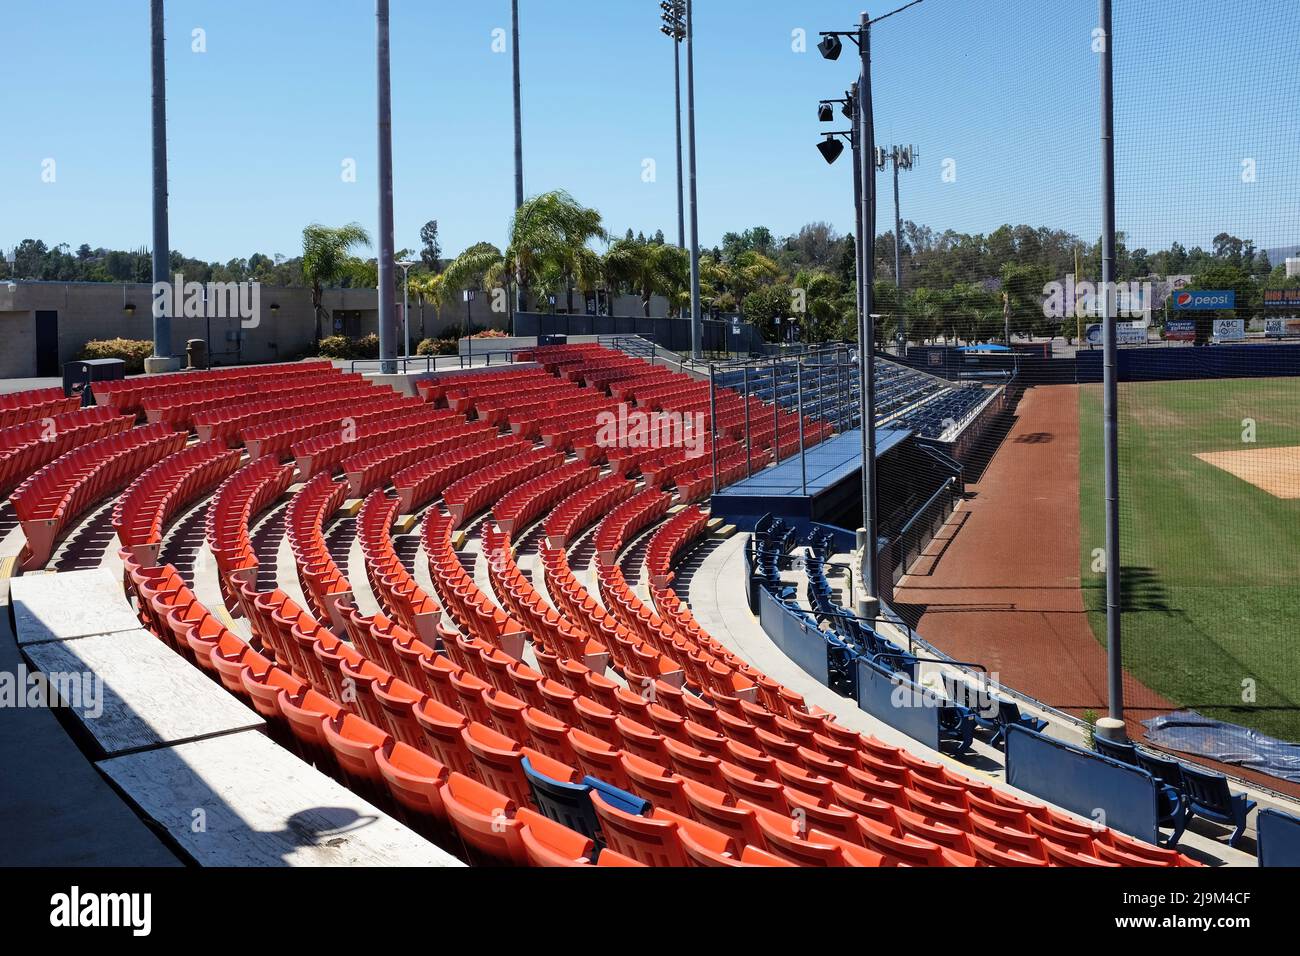 FULLERTON CALIFORNIA - 22 MAY 2020: Third Base side seating and dugout at Goodwin Field, on the campus of California State University Fullerton, CSUF. Stock Photo